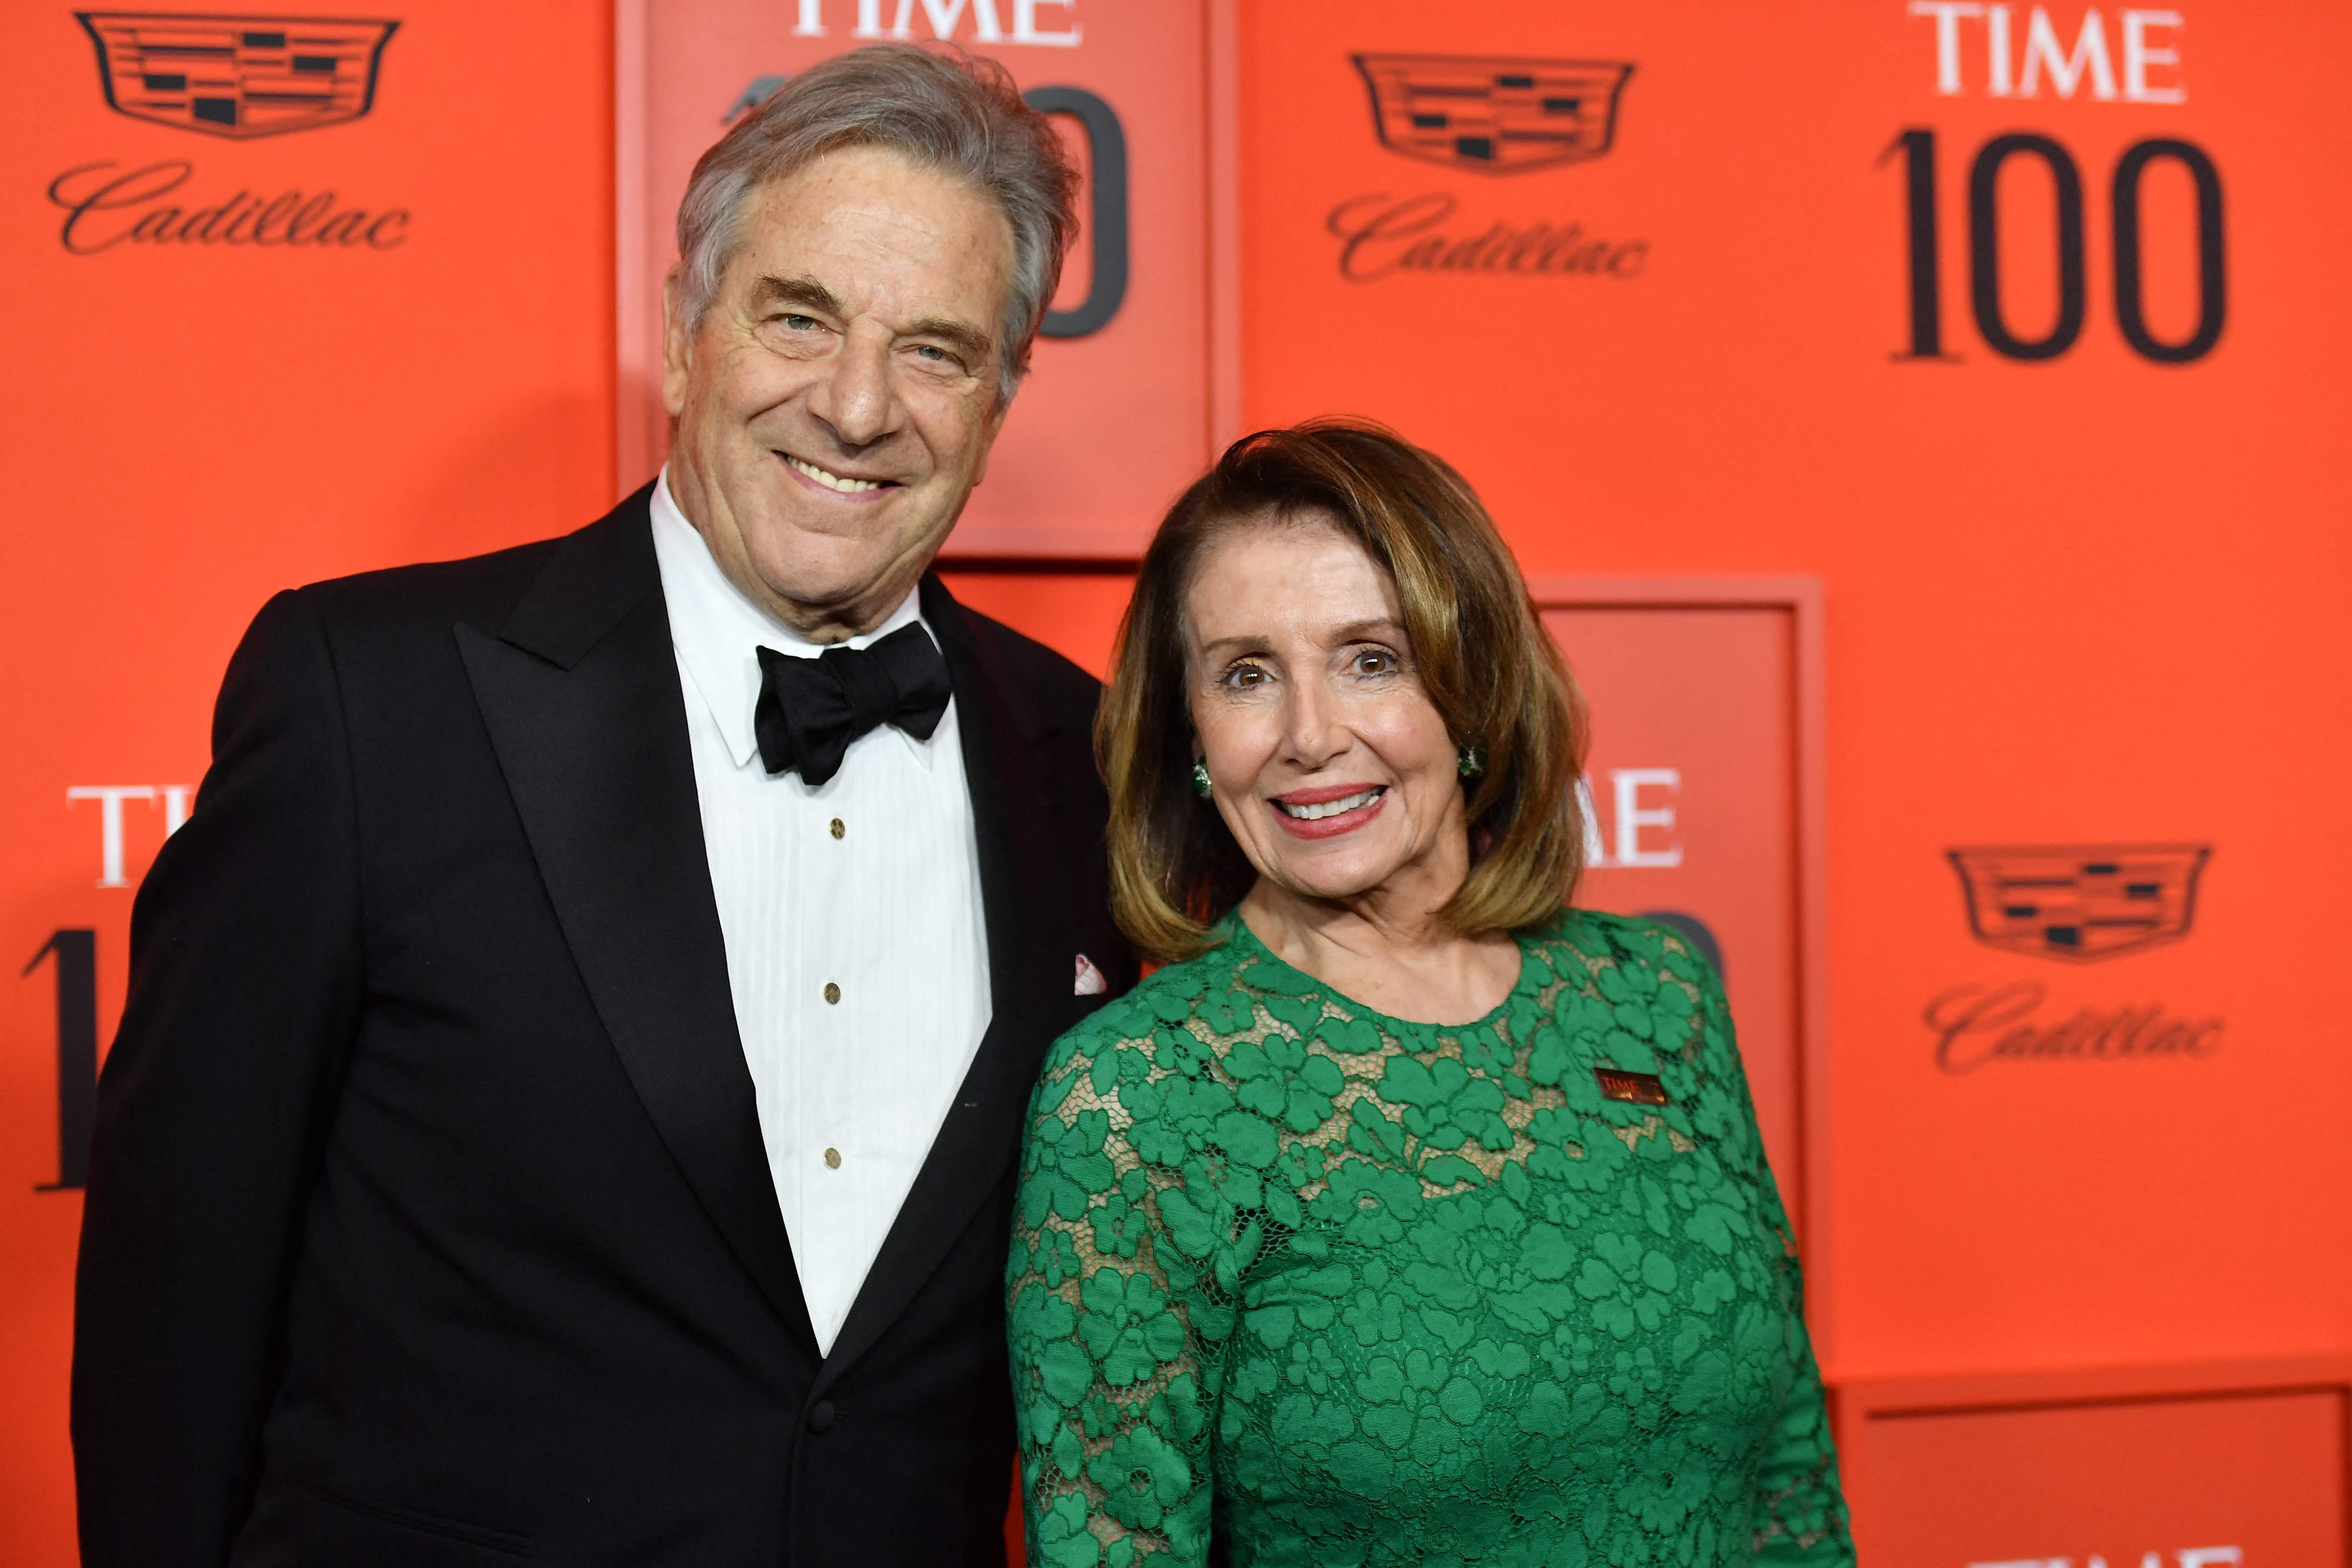 Paul Pelosi attack video to be released. Here's how the assault on Nancy Pelosi's husband unfolded